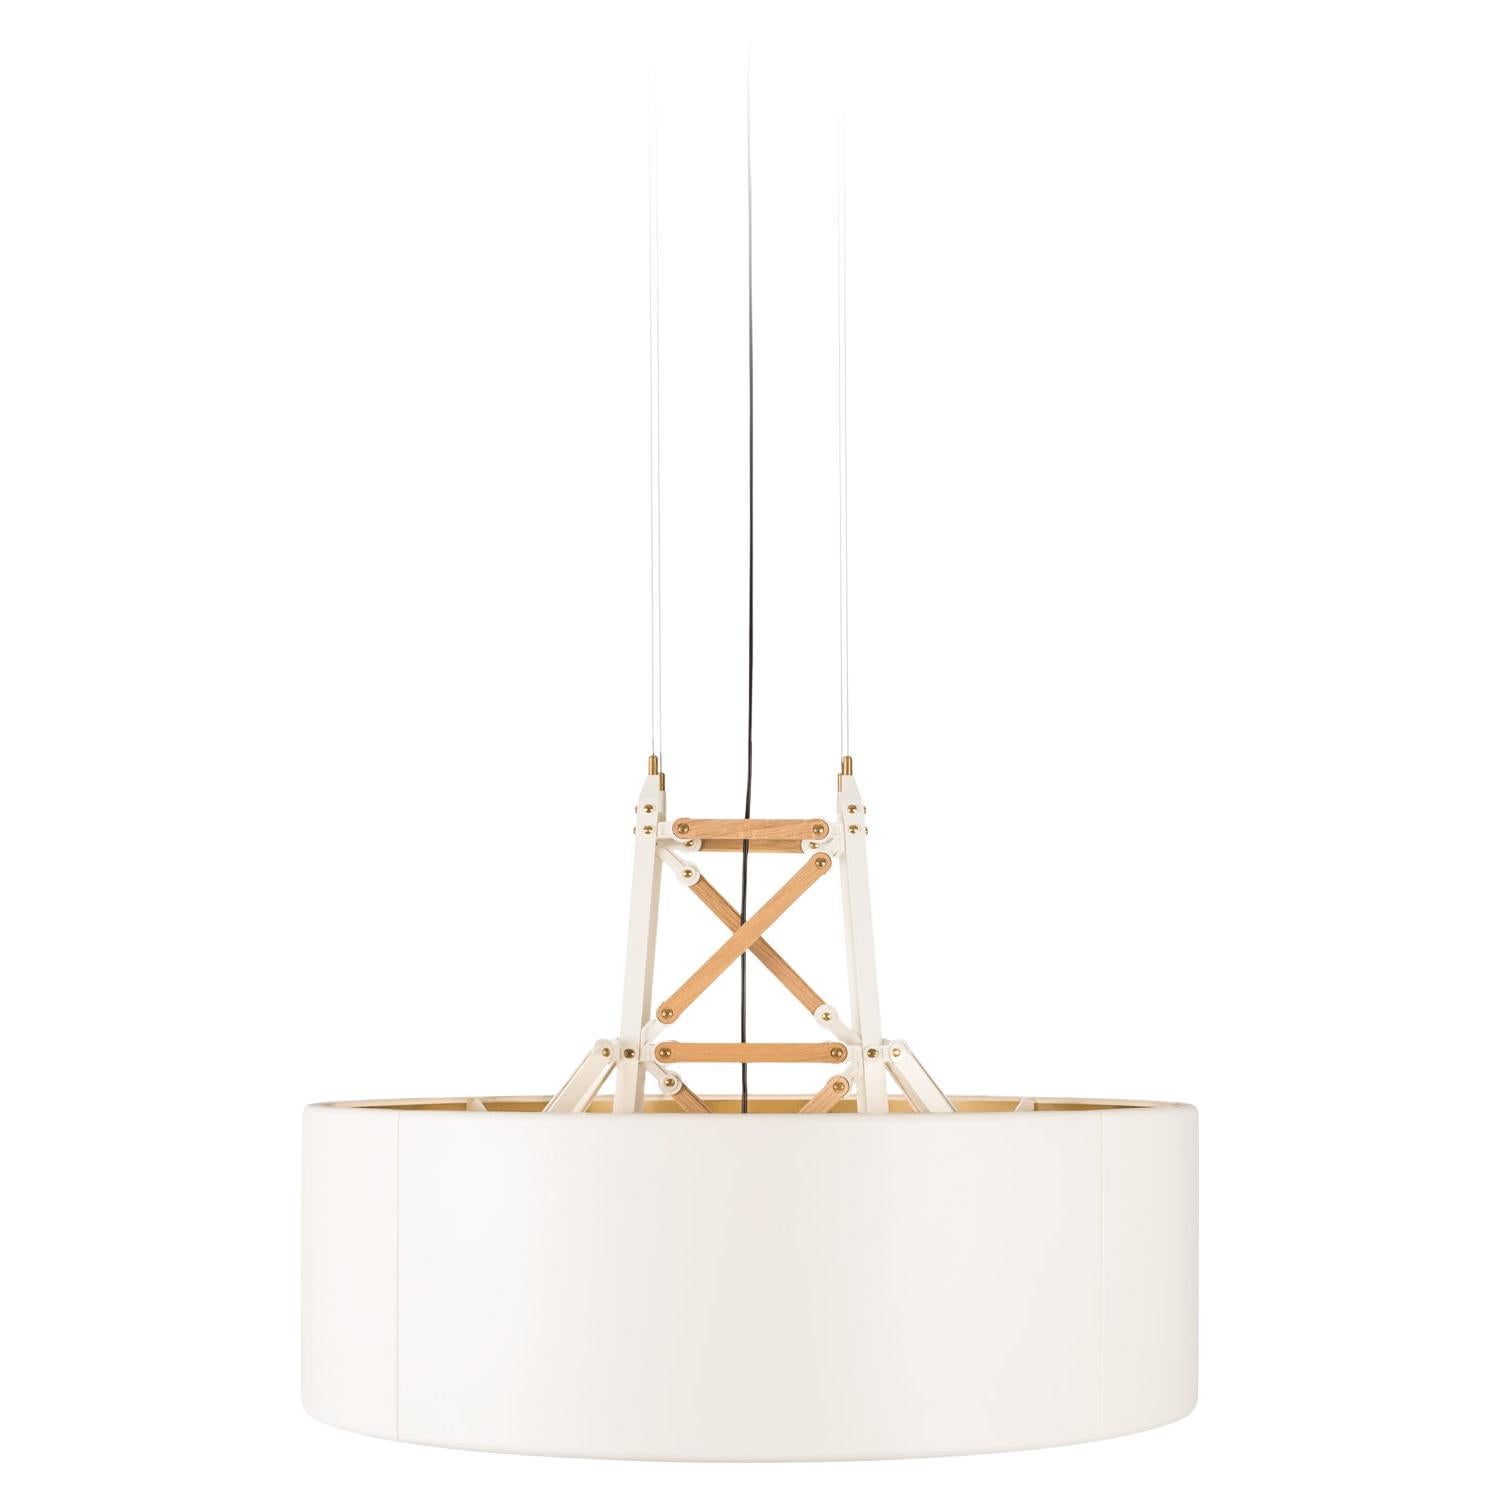 Moooi Construction Large Suspension Lamp in White Aluminum with Wooden Slats